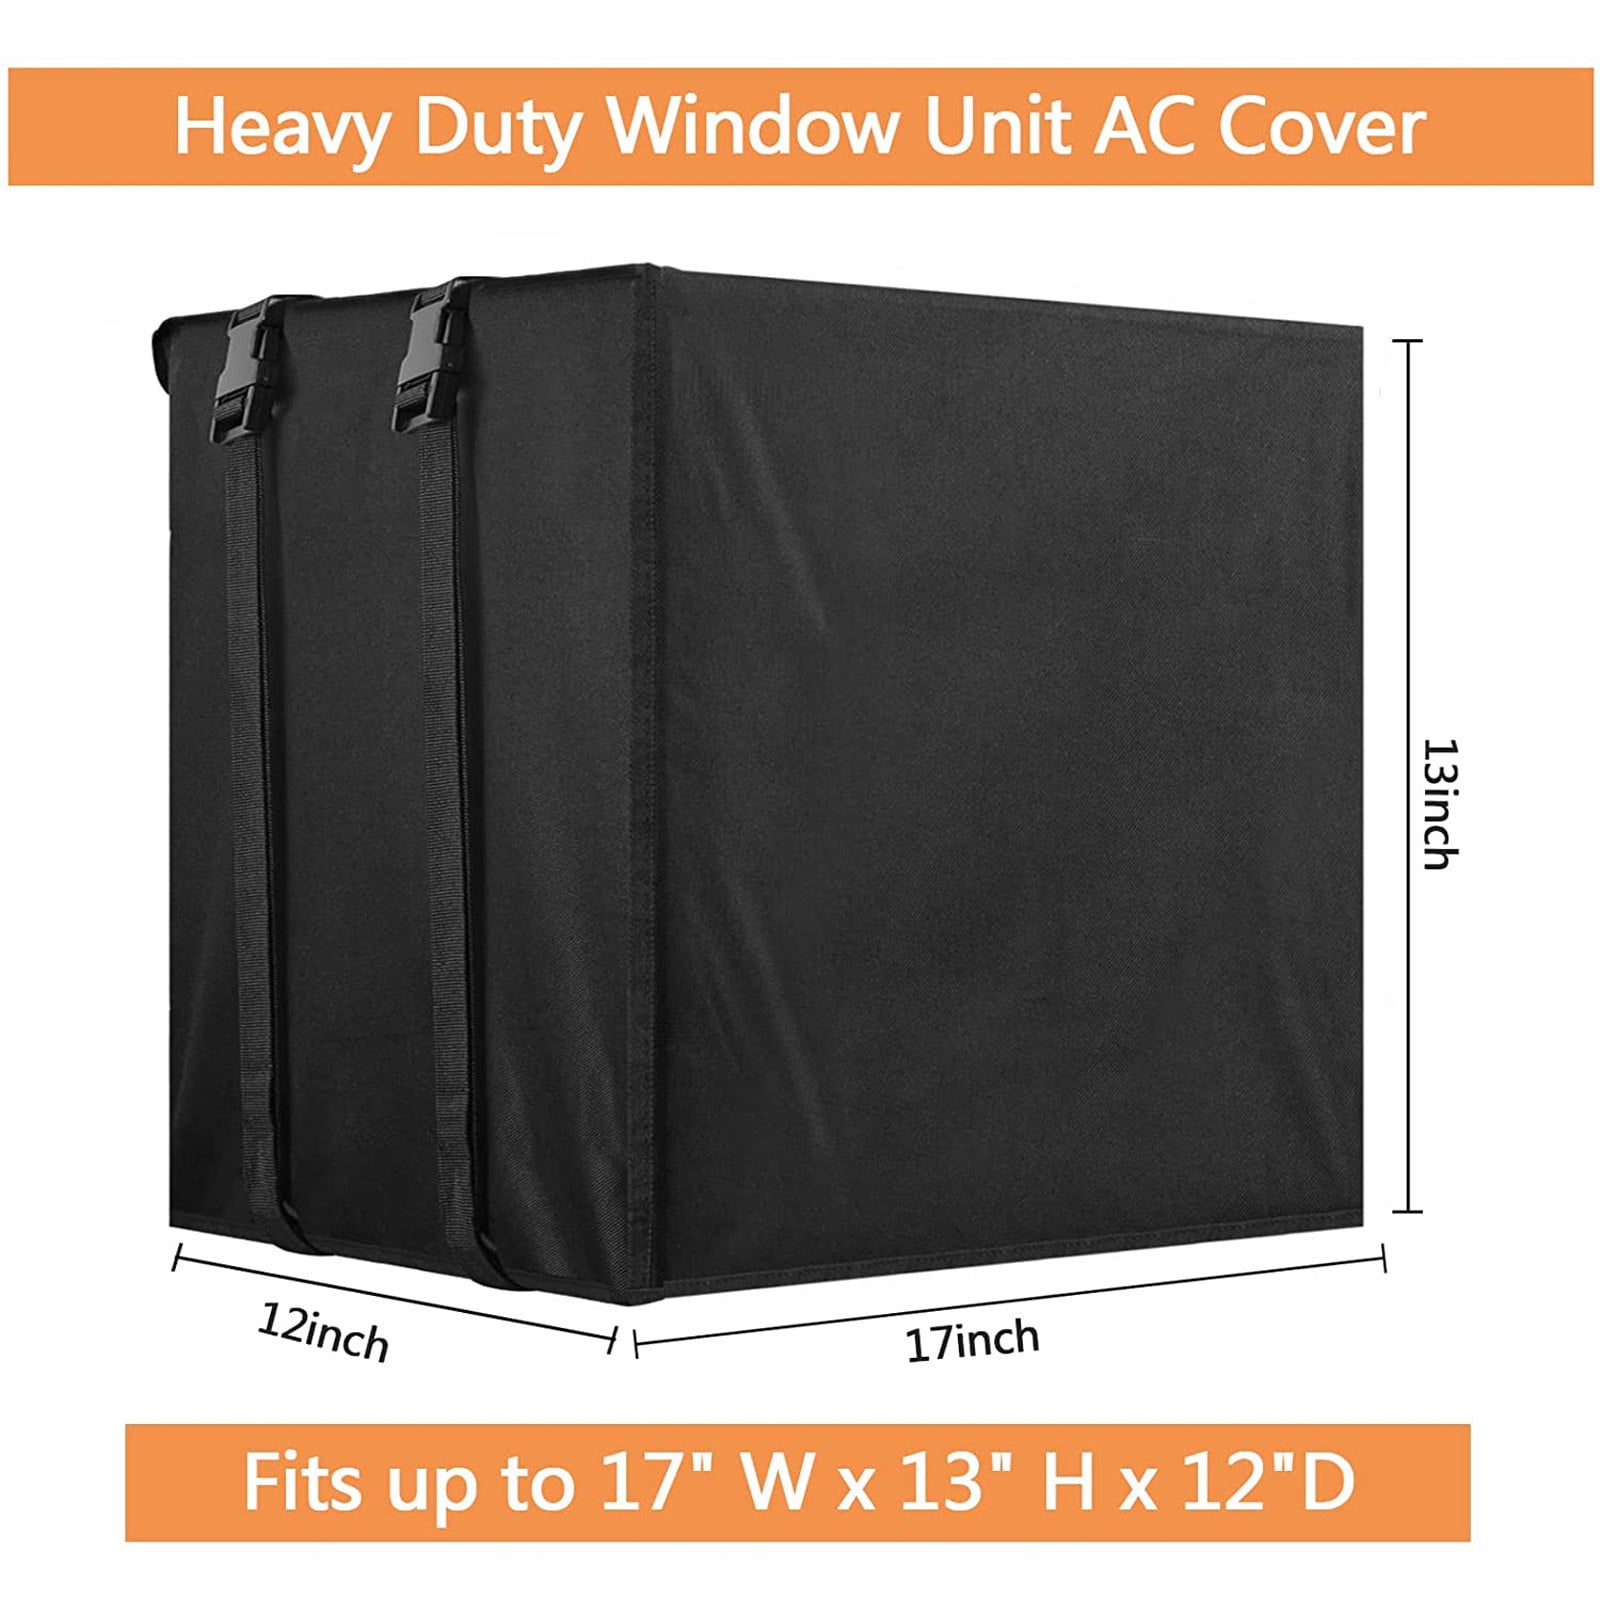 Window Air Conditioner Cover with Water Resistant and Windproof Design Black 17W x 13H x 12D Inches Sunolga Air Conditioner Covers for Window Units